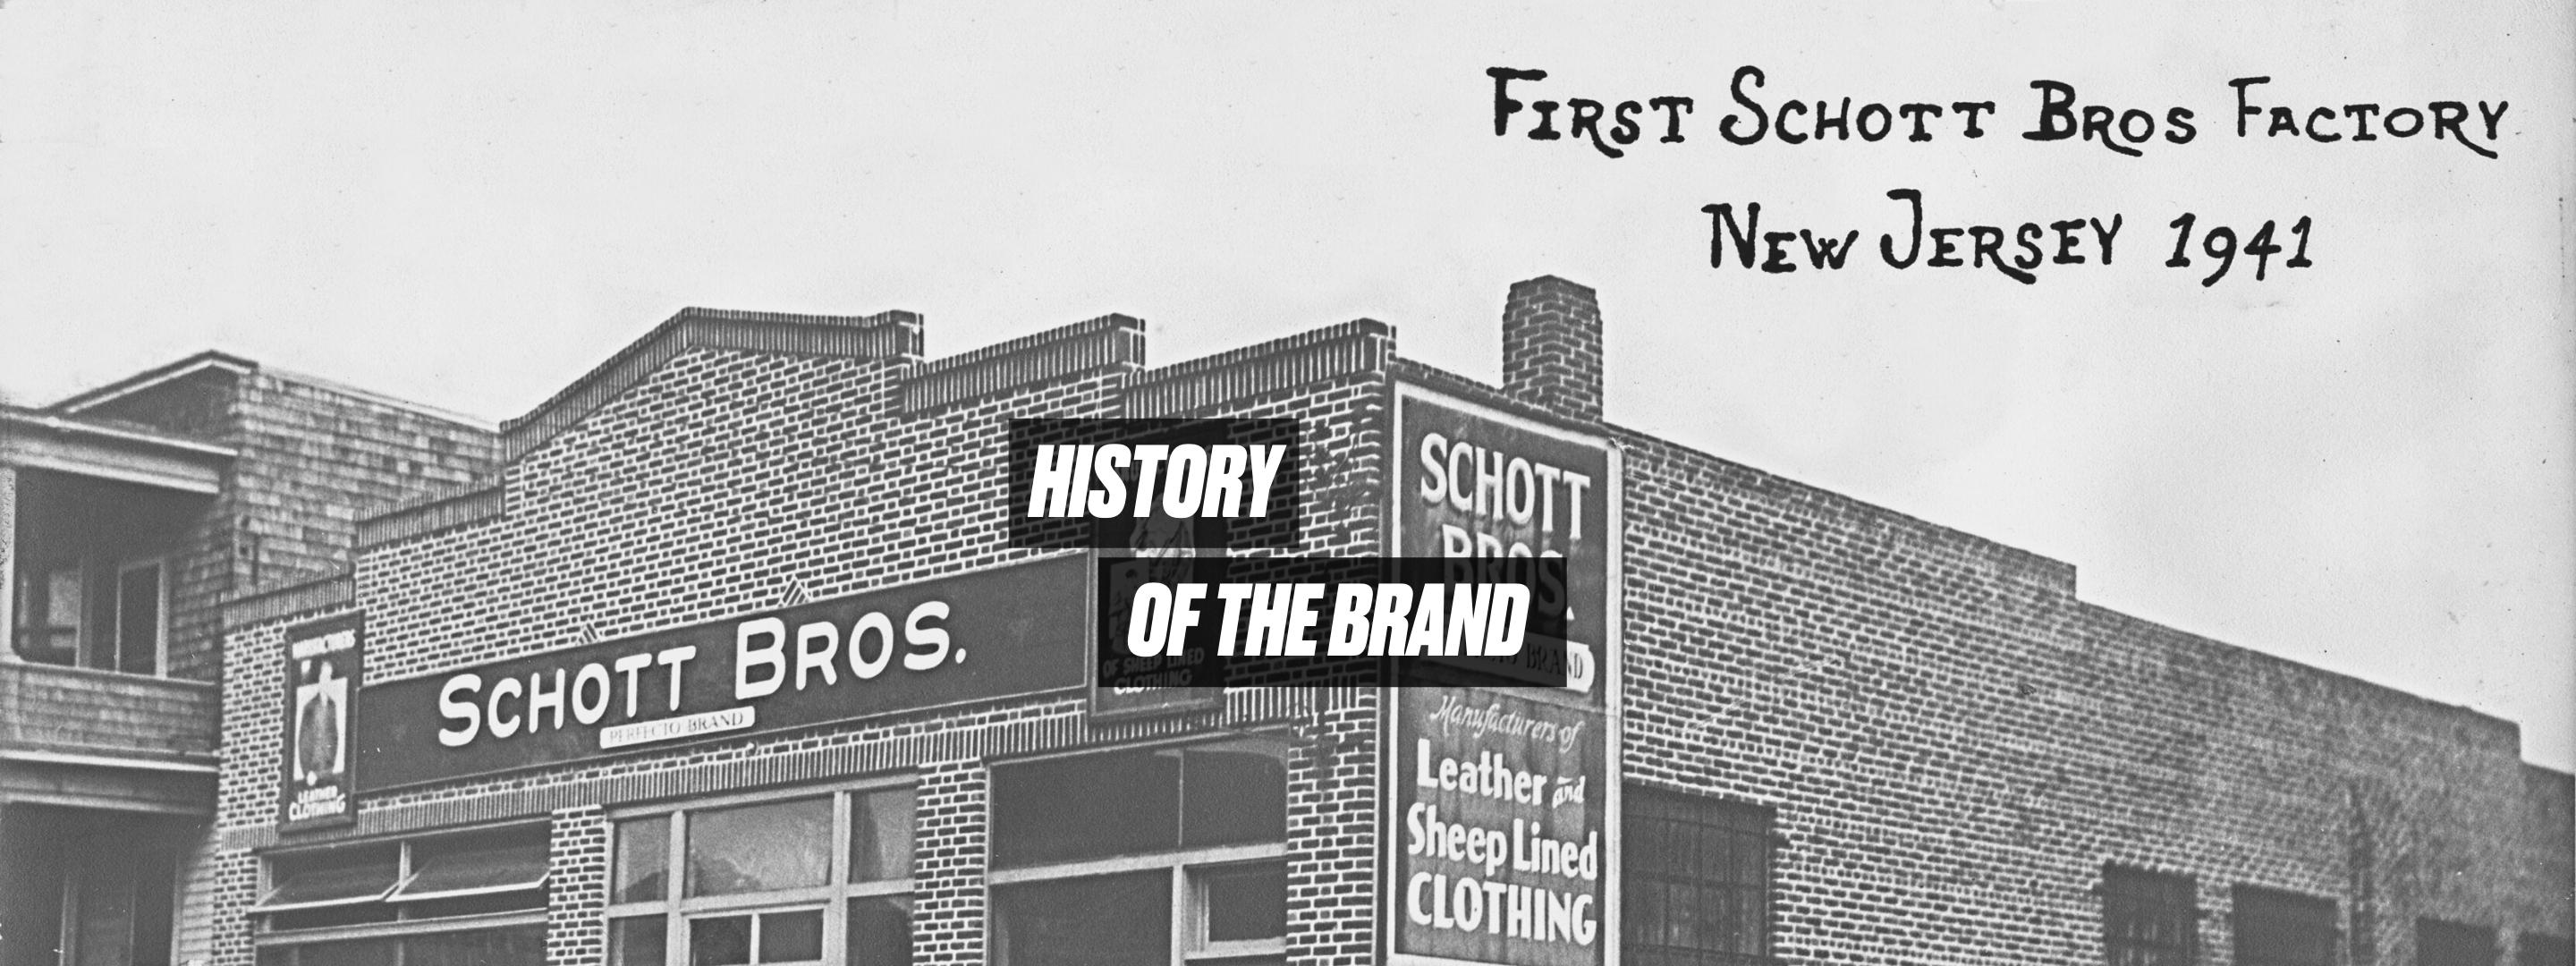 History of the Brand